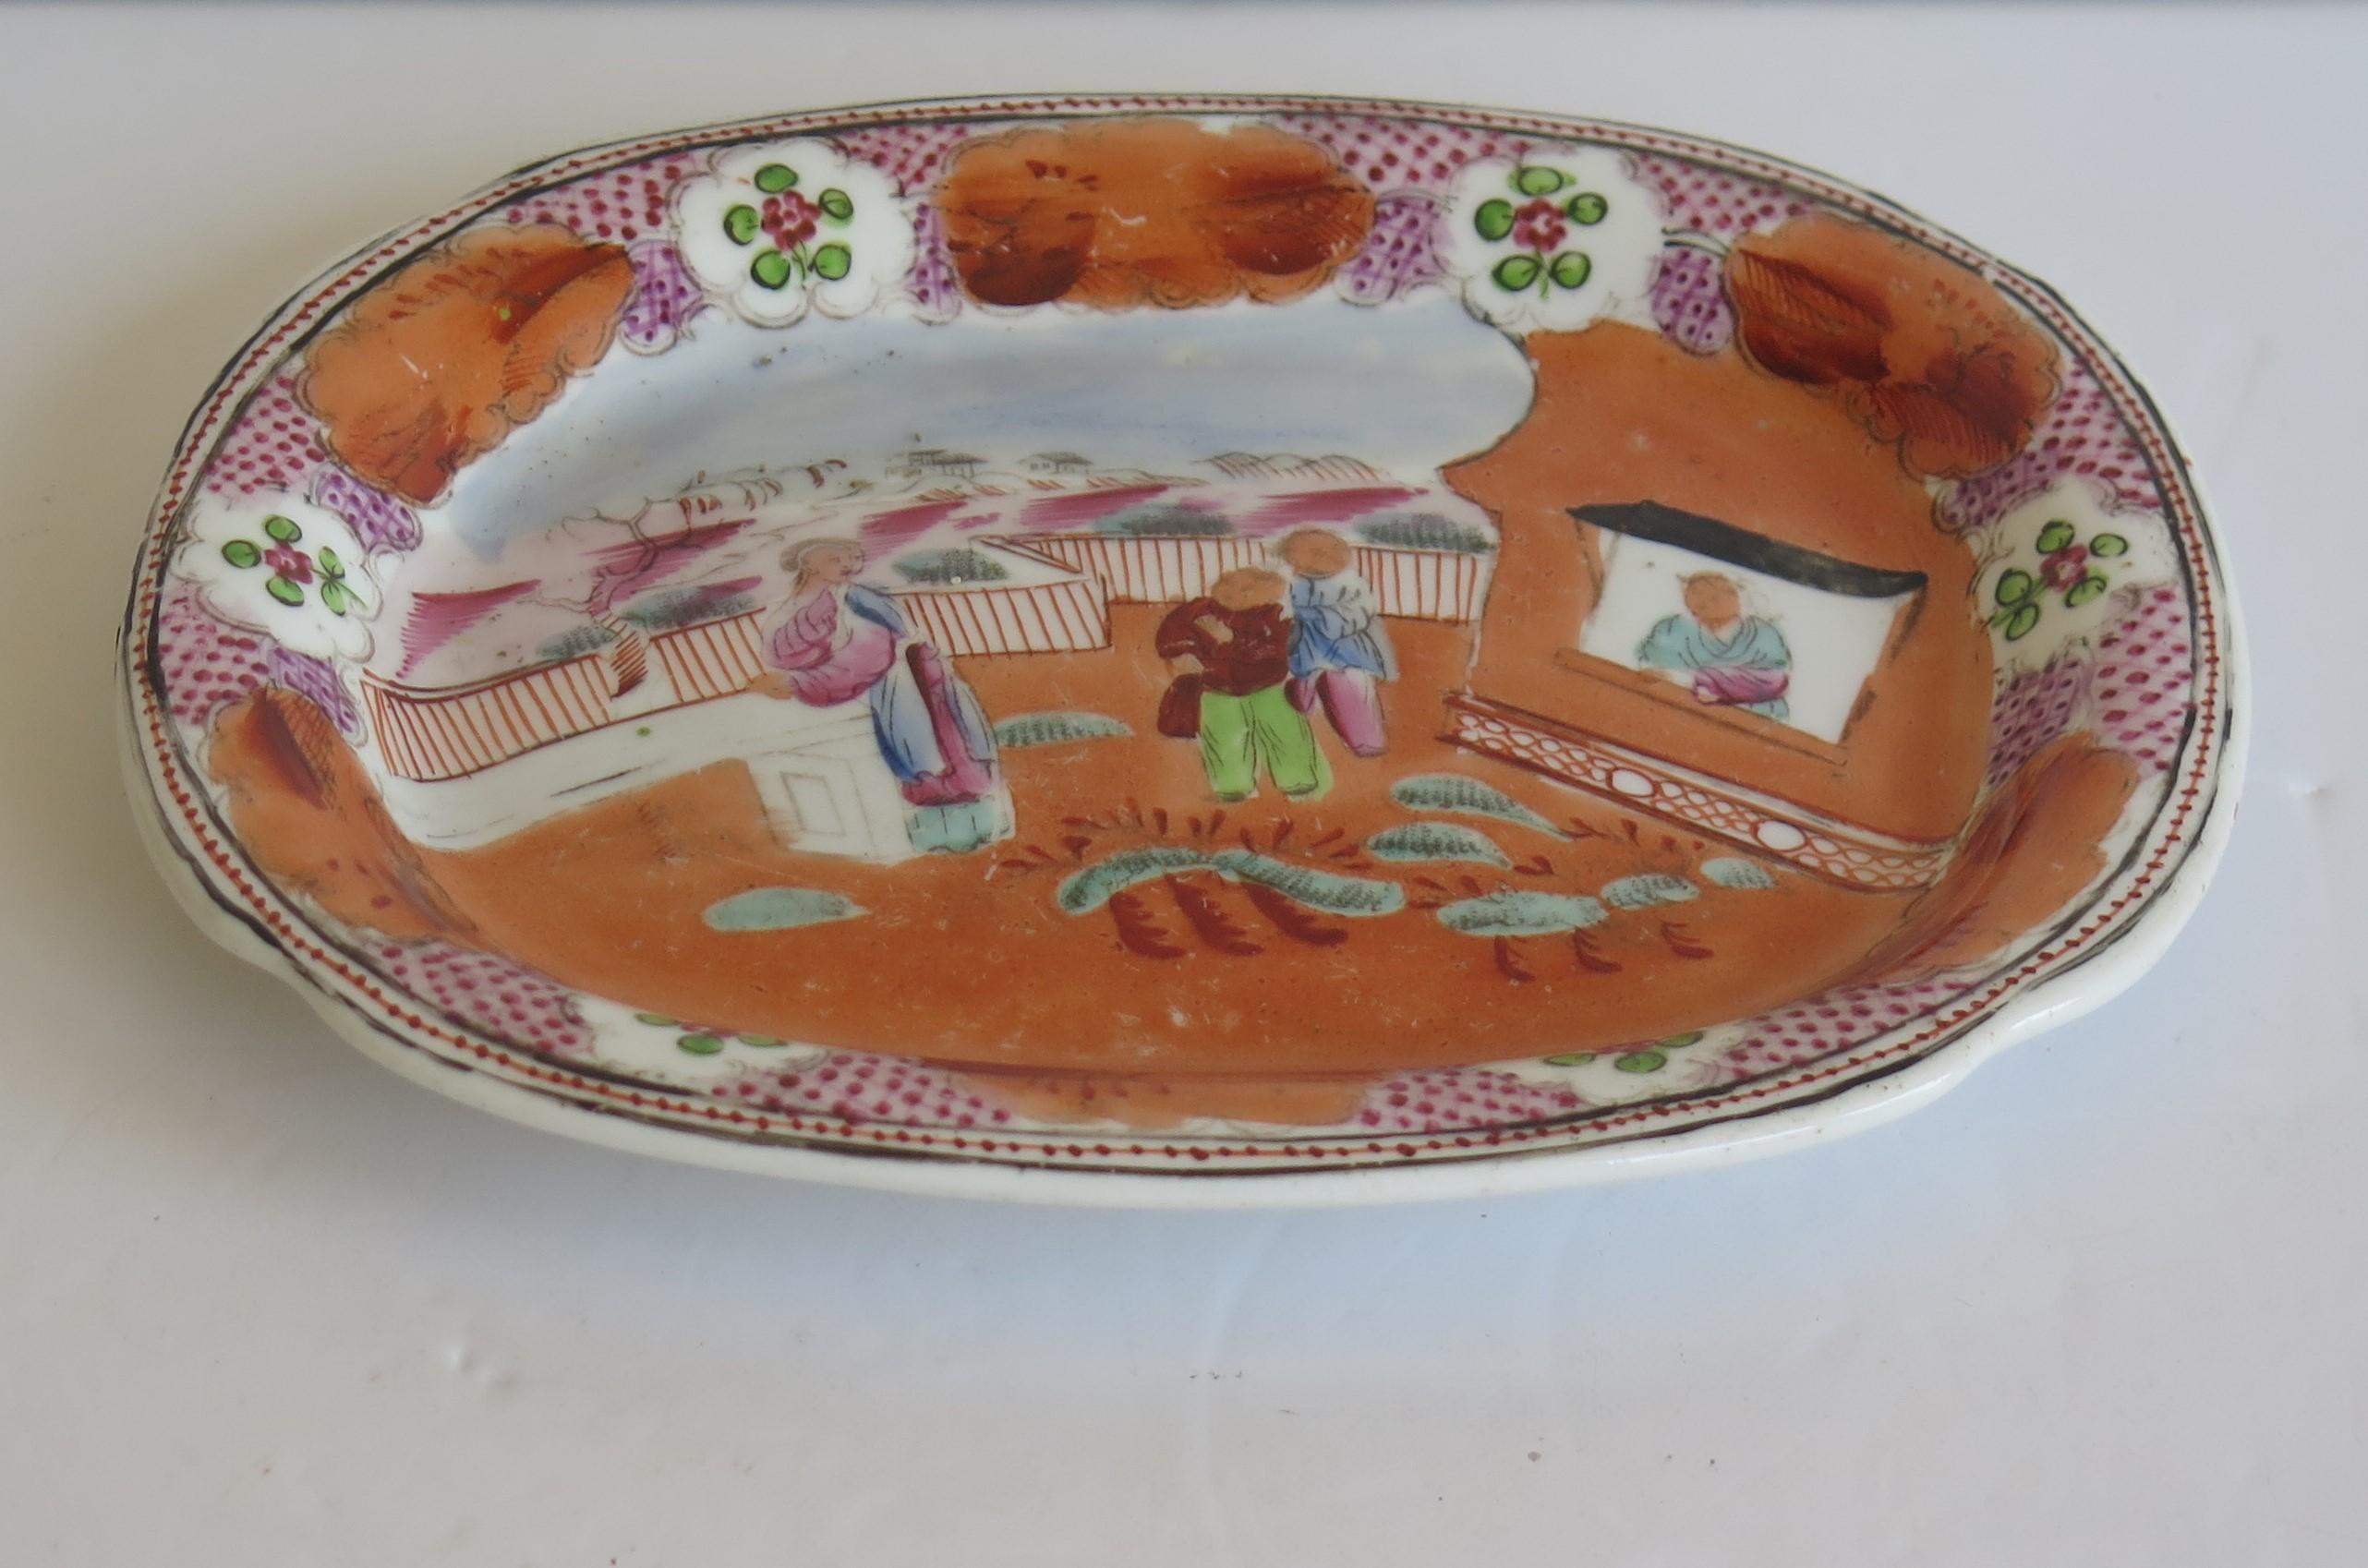 This is a hard paste porcelain Dish or small platter by New Hall dating to very early 19th century, circa 1800.

This dish or platter is well potted on a low foot. 

The decoration is hand-painted in bold enamels in a chinoiserie pattern called 